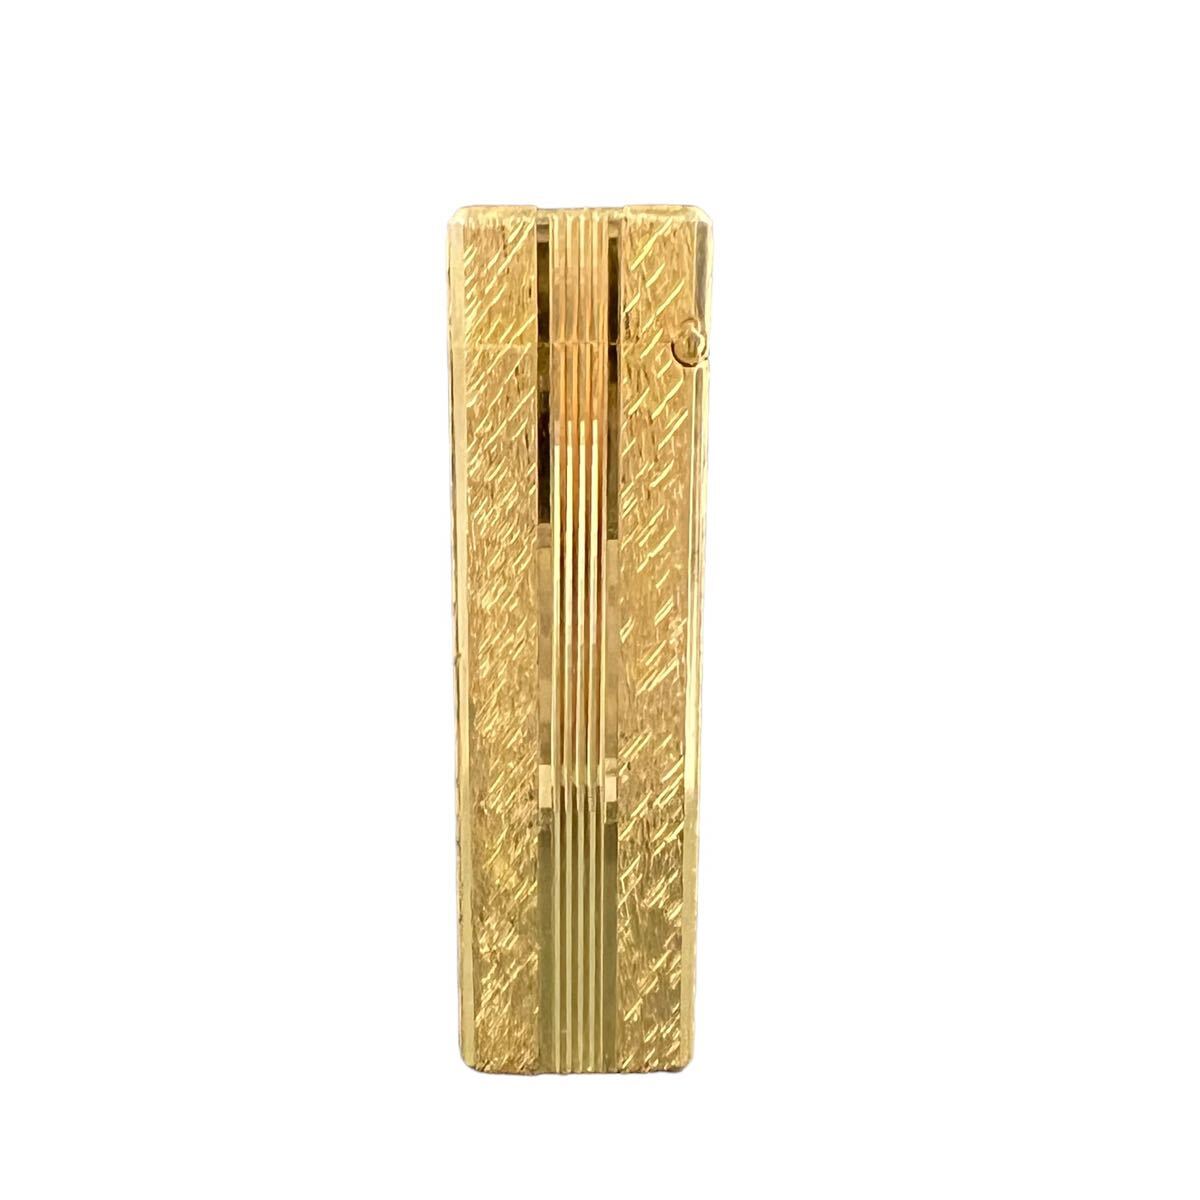 1 jpy ~ selling out Windmill gas lighter lighter Gold color roller smoking goods smoking . windmill case attaching including in a package un- possible [L0953]